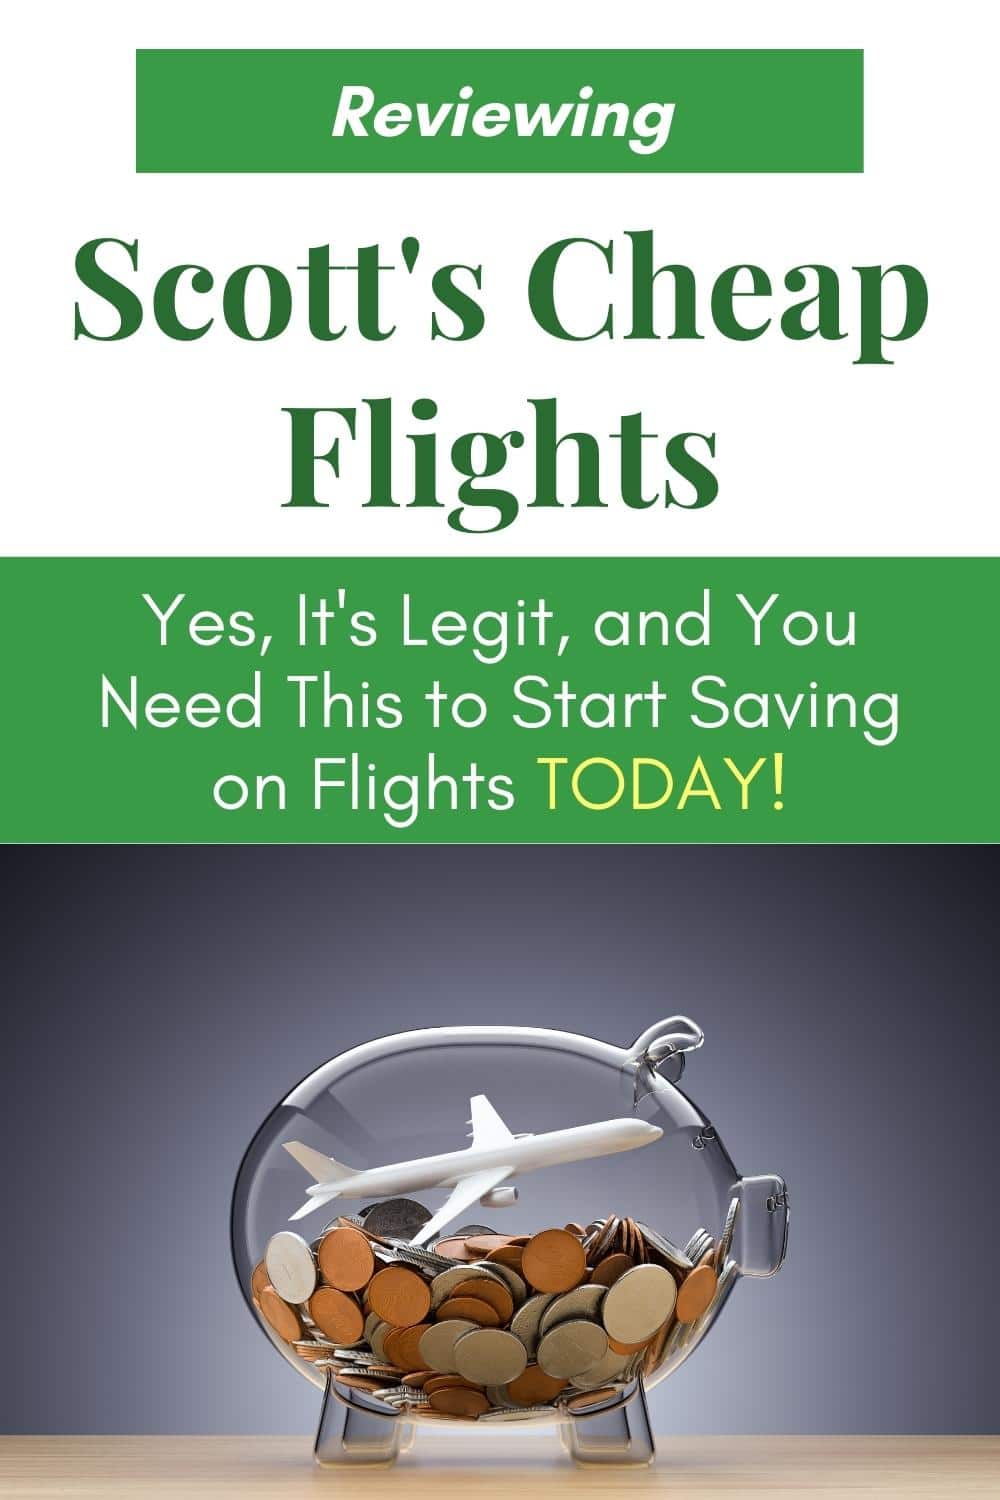 Scott’s Cheap Flights Review: How to Get Amazing Deals on Airfare the Easy Way